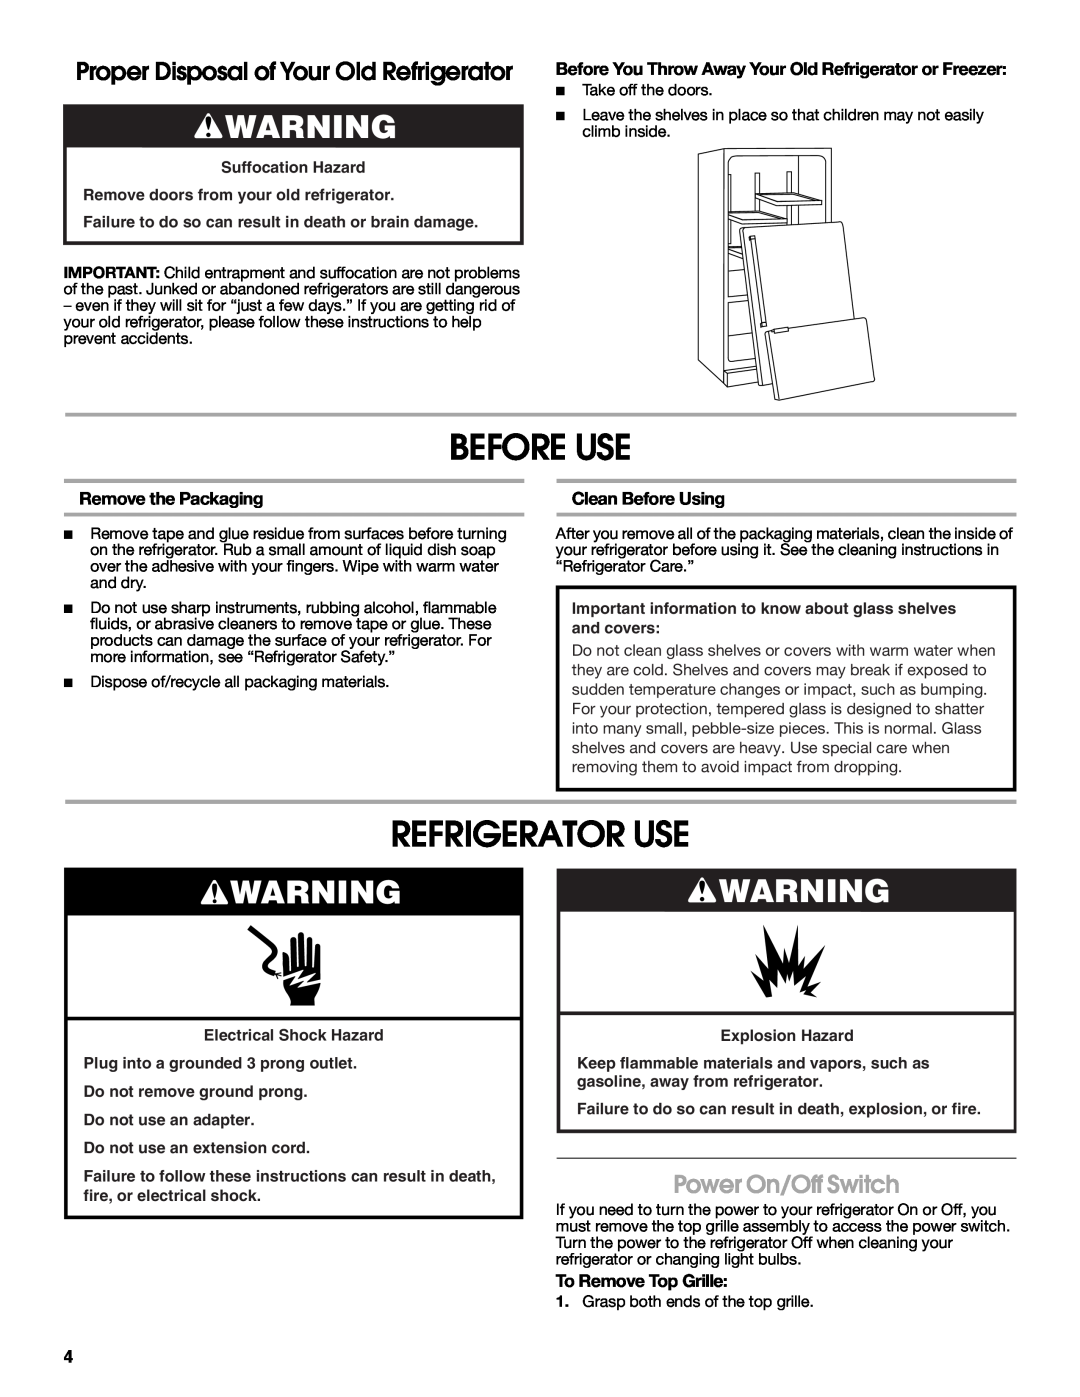 Jenn-Air W10183787A manual Before Use, Refrigerator Use, Proper Disposal of Your Old Refrigerator, Power On/Off Switch 